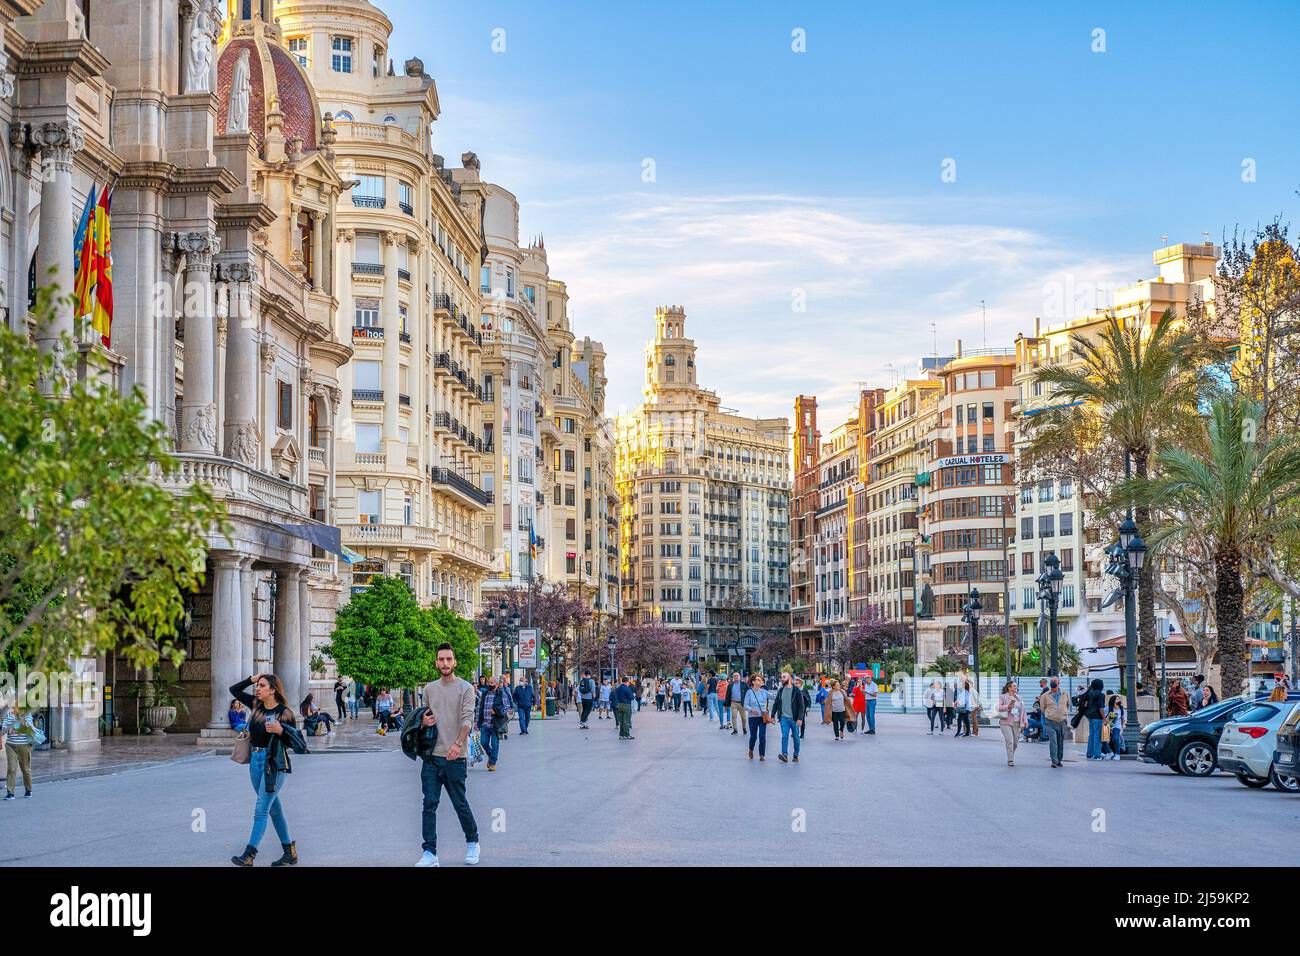 Large group of tourists or people are seen out and about in the Plaza del Ayuntamiento or City Hall Town Square. Majestic colonial architecture buildi Stock Photo